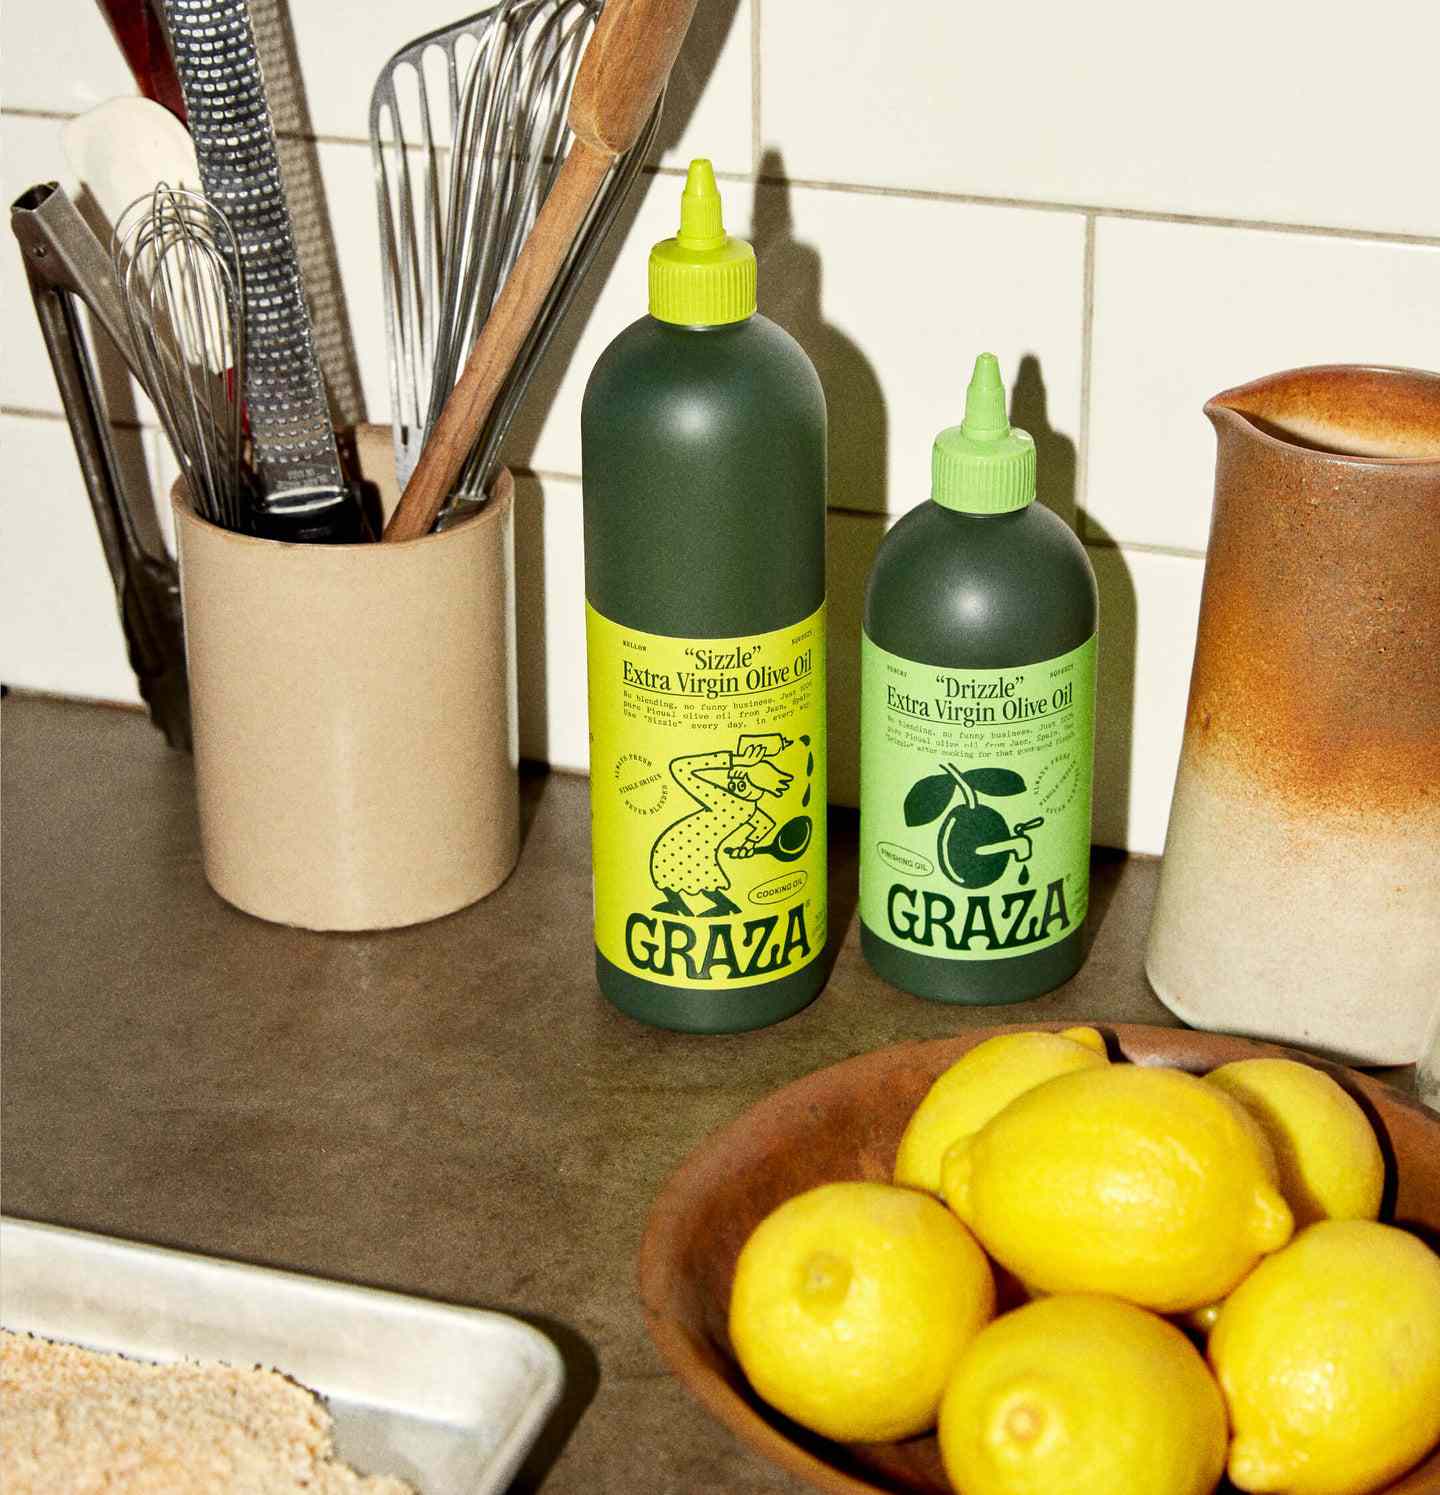 Graza “Drizzle” & “Sizzle” Extra Virgin Olive Oil